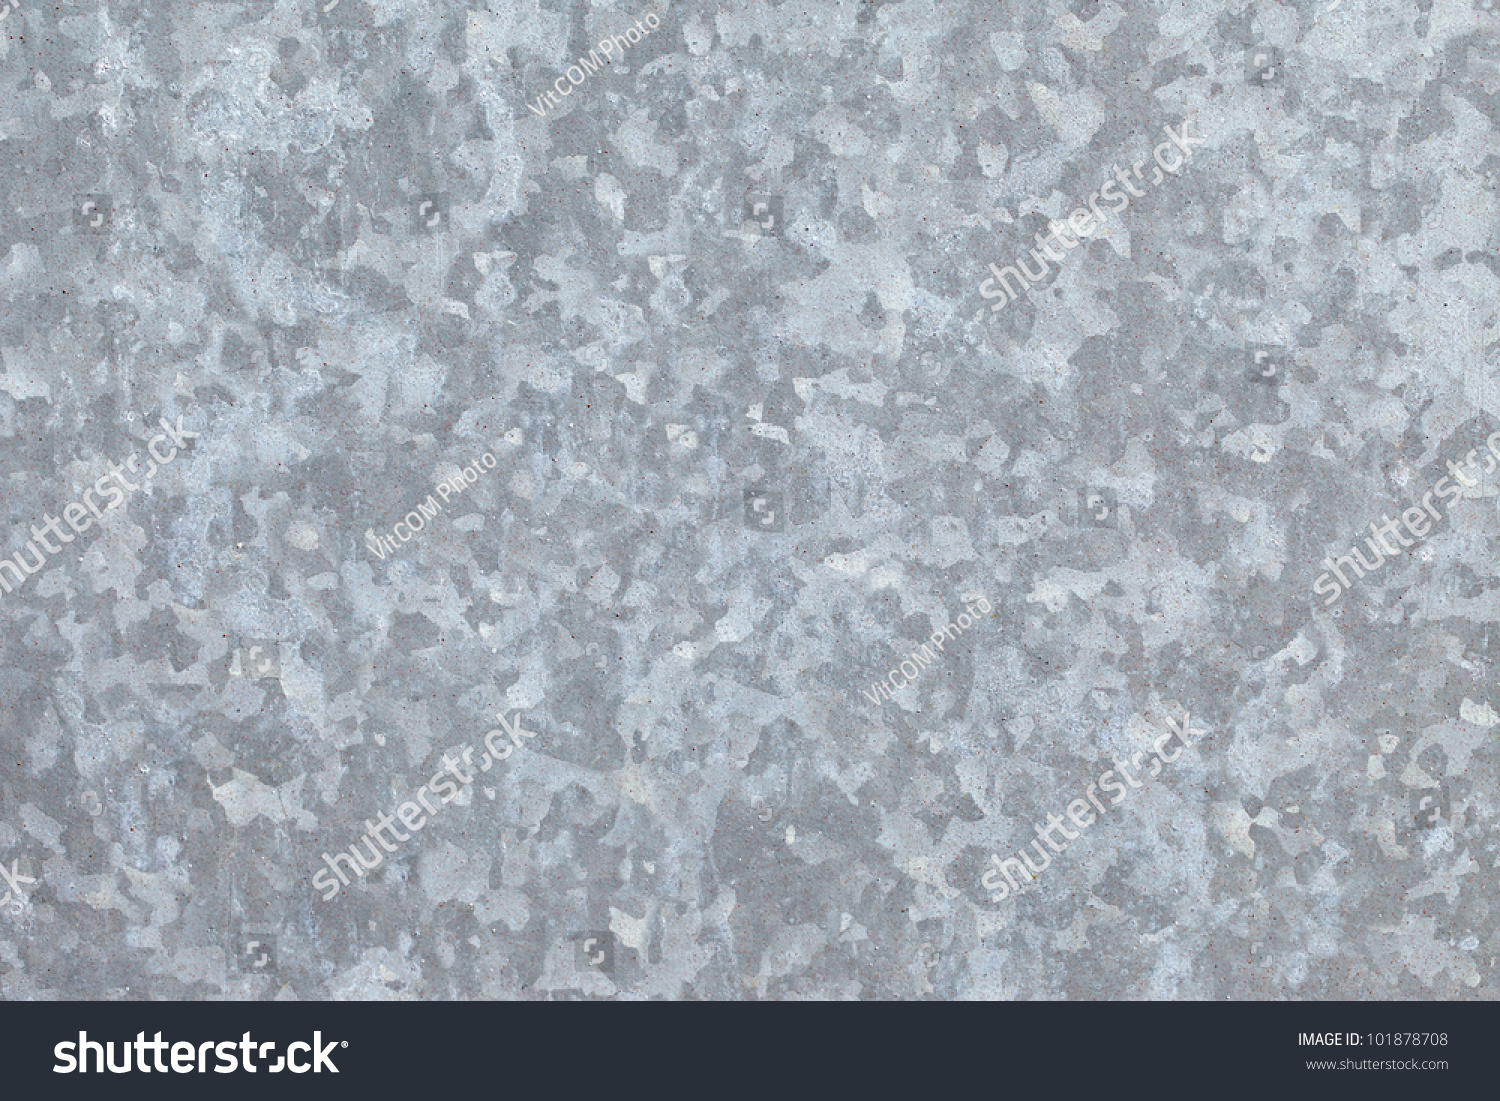 Zinc galvanized sheet of metal. Can be used as background or texture #101878708